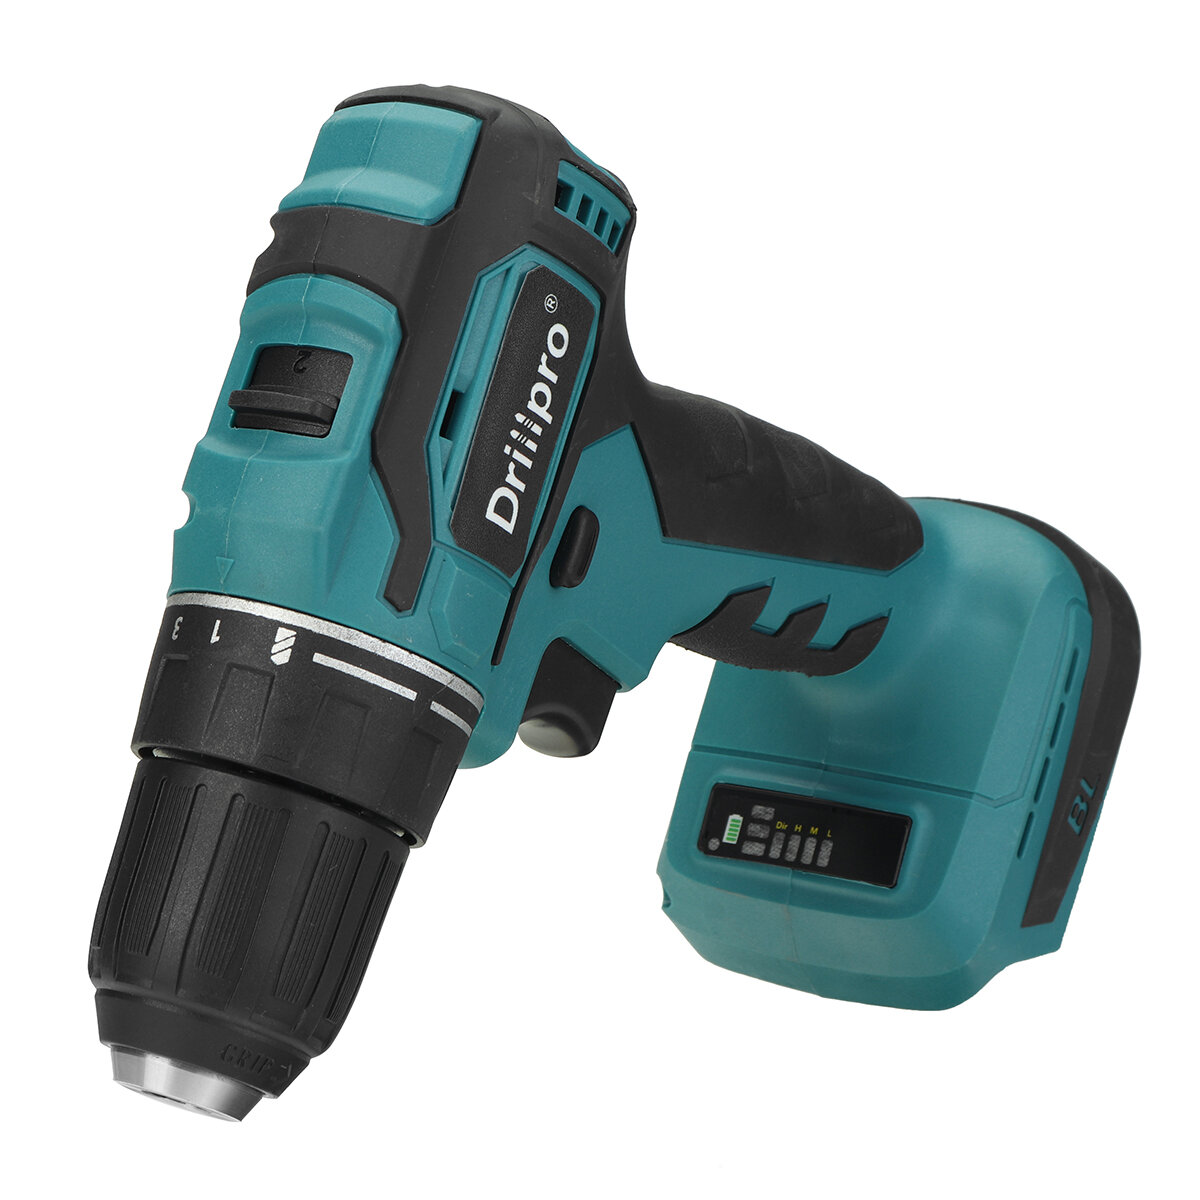 Drillpro 10mm/13mm Cordless Brushless Drill Driver Rechargable Electric Drill Fit Mak COD